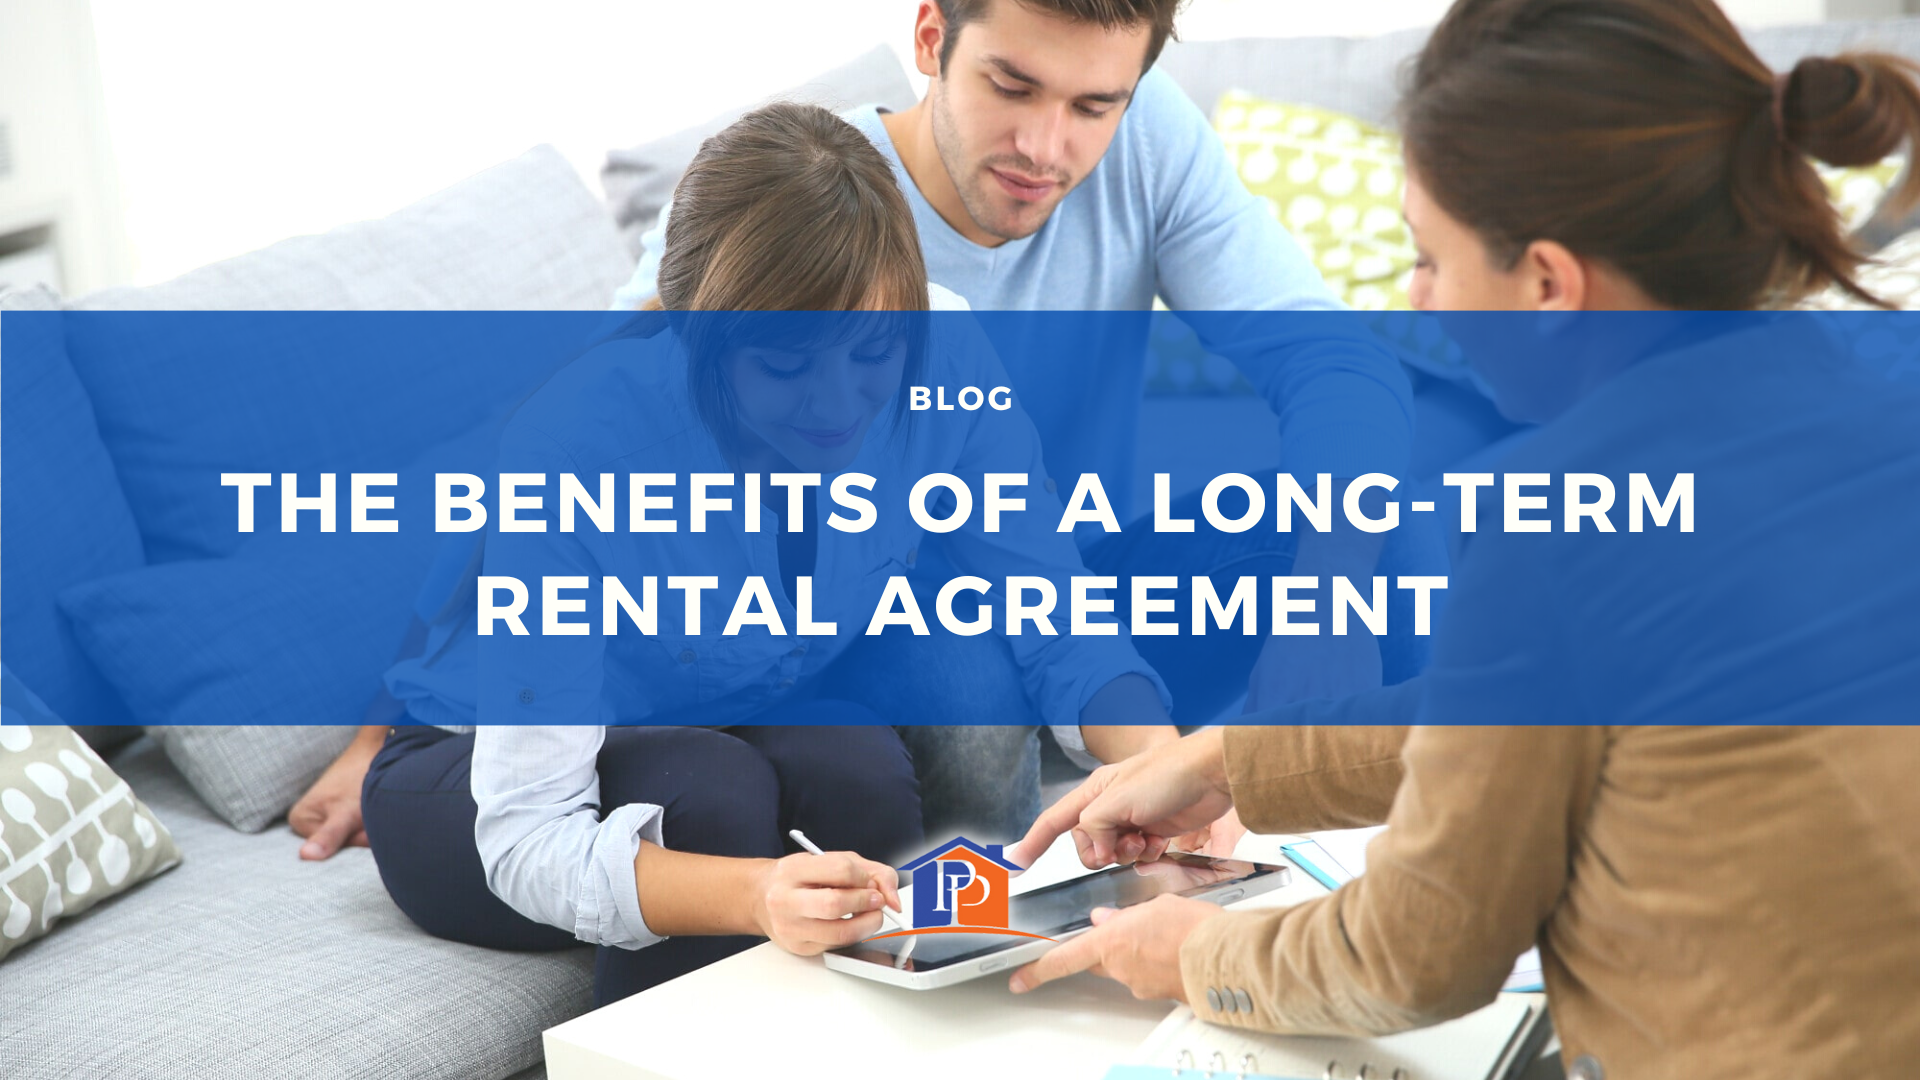 The Benefits of a Long-Term Rental Agreement